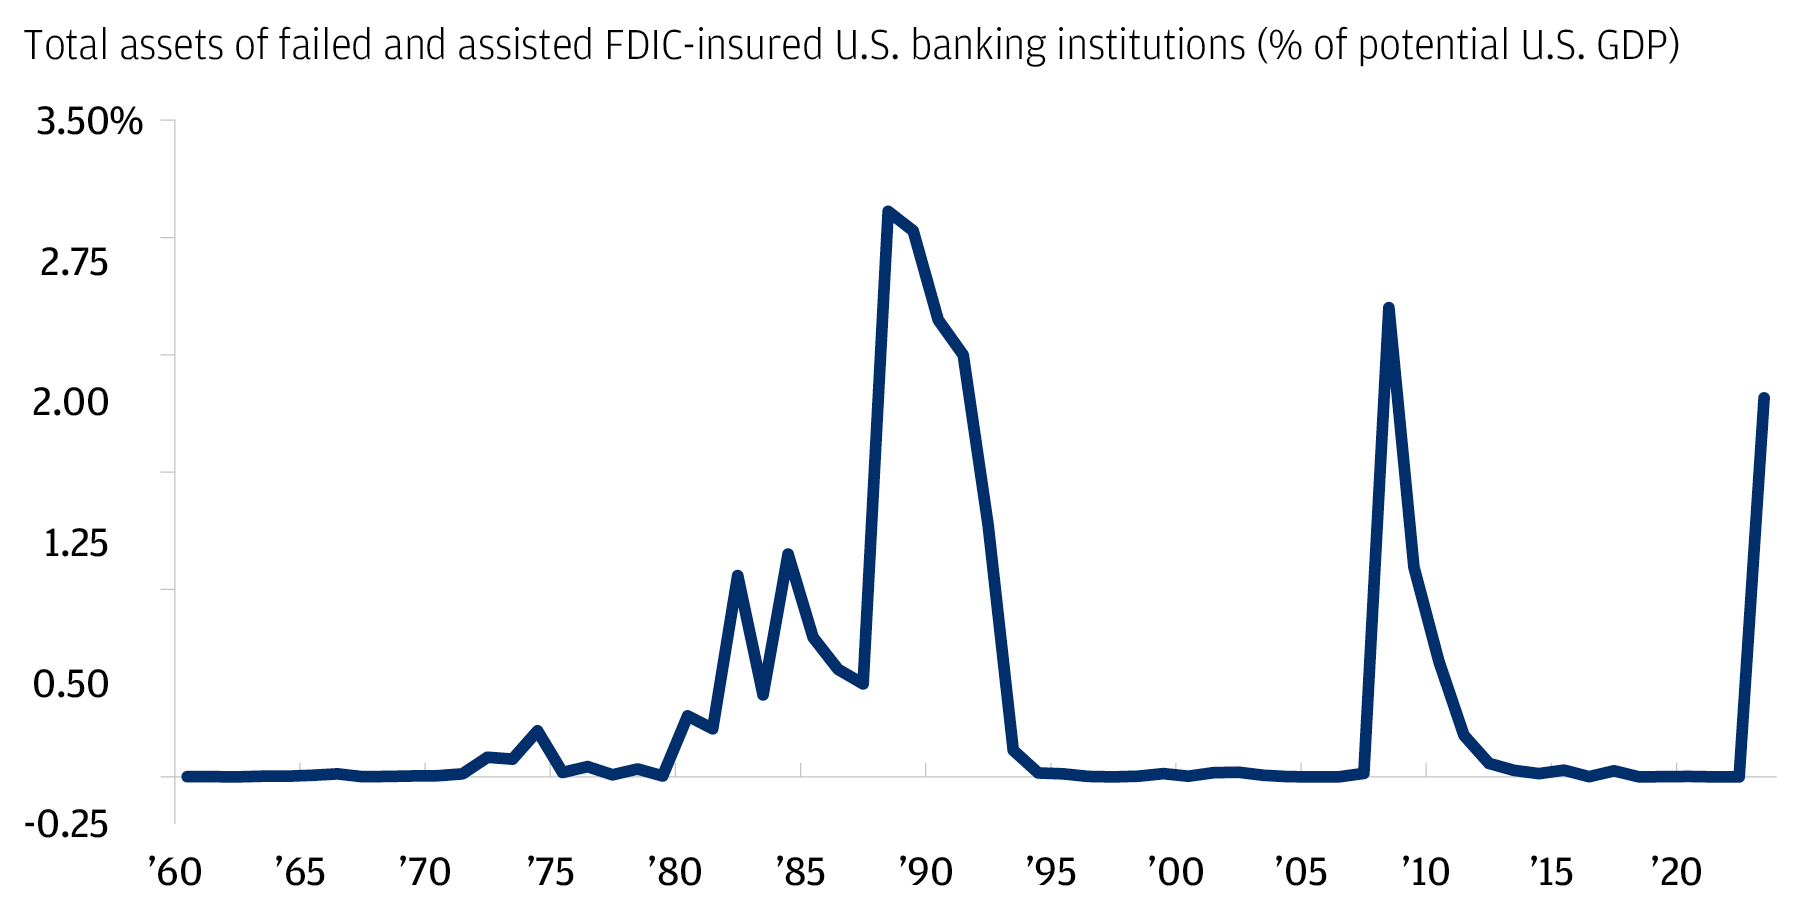 The chart describes the total assets of failed and assisted banking institutions as a % of potential GDP from 1960 to 2023.